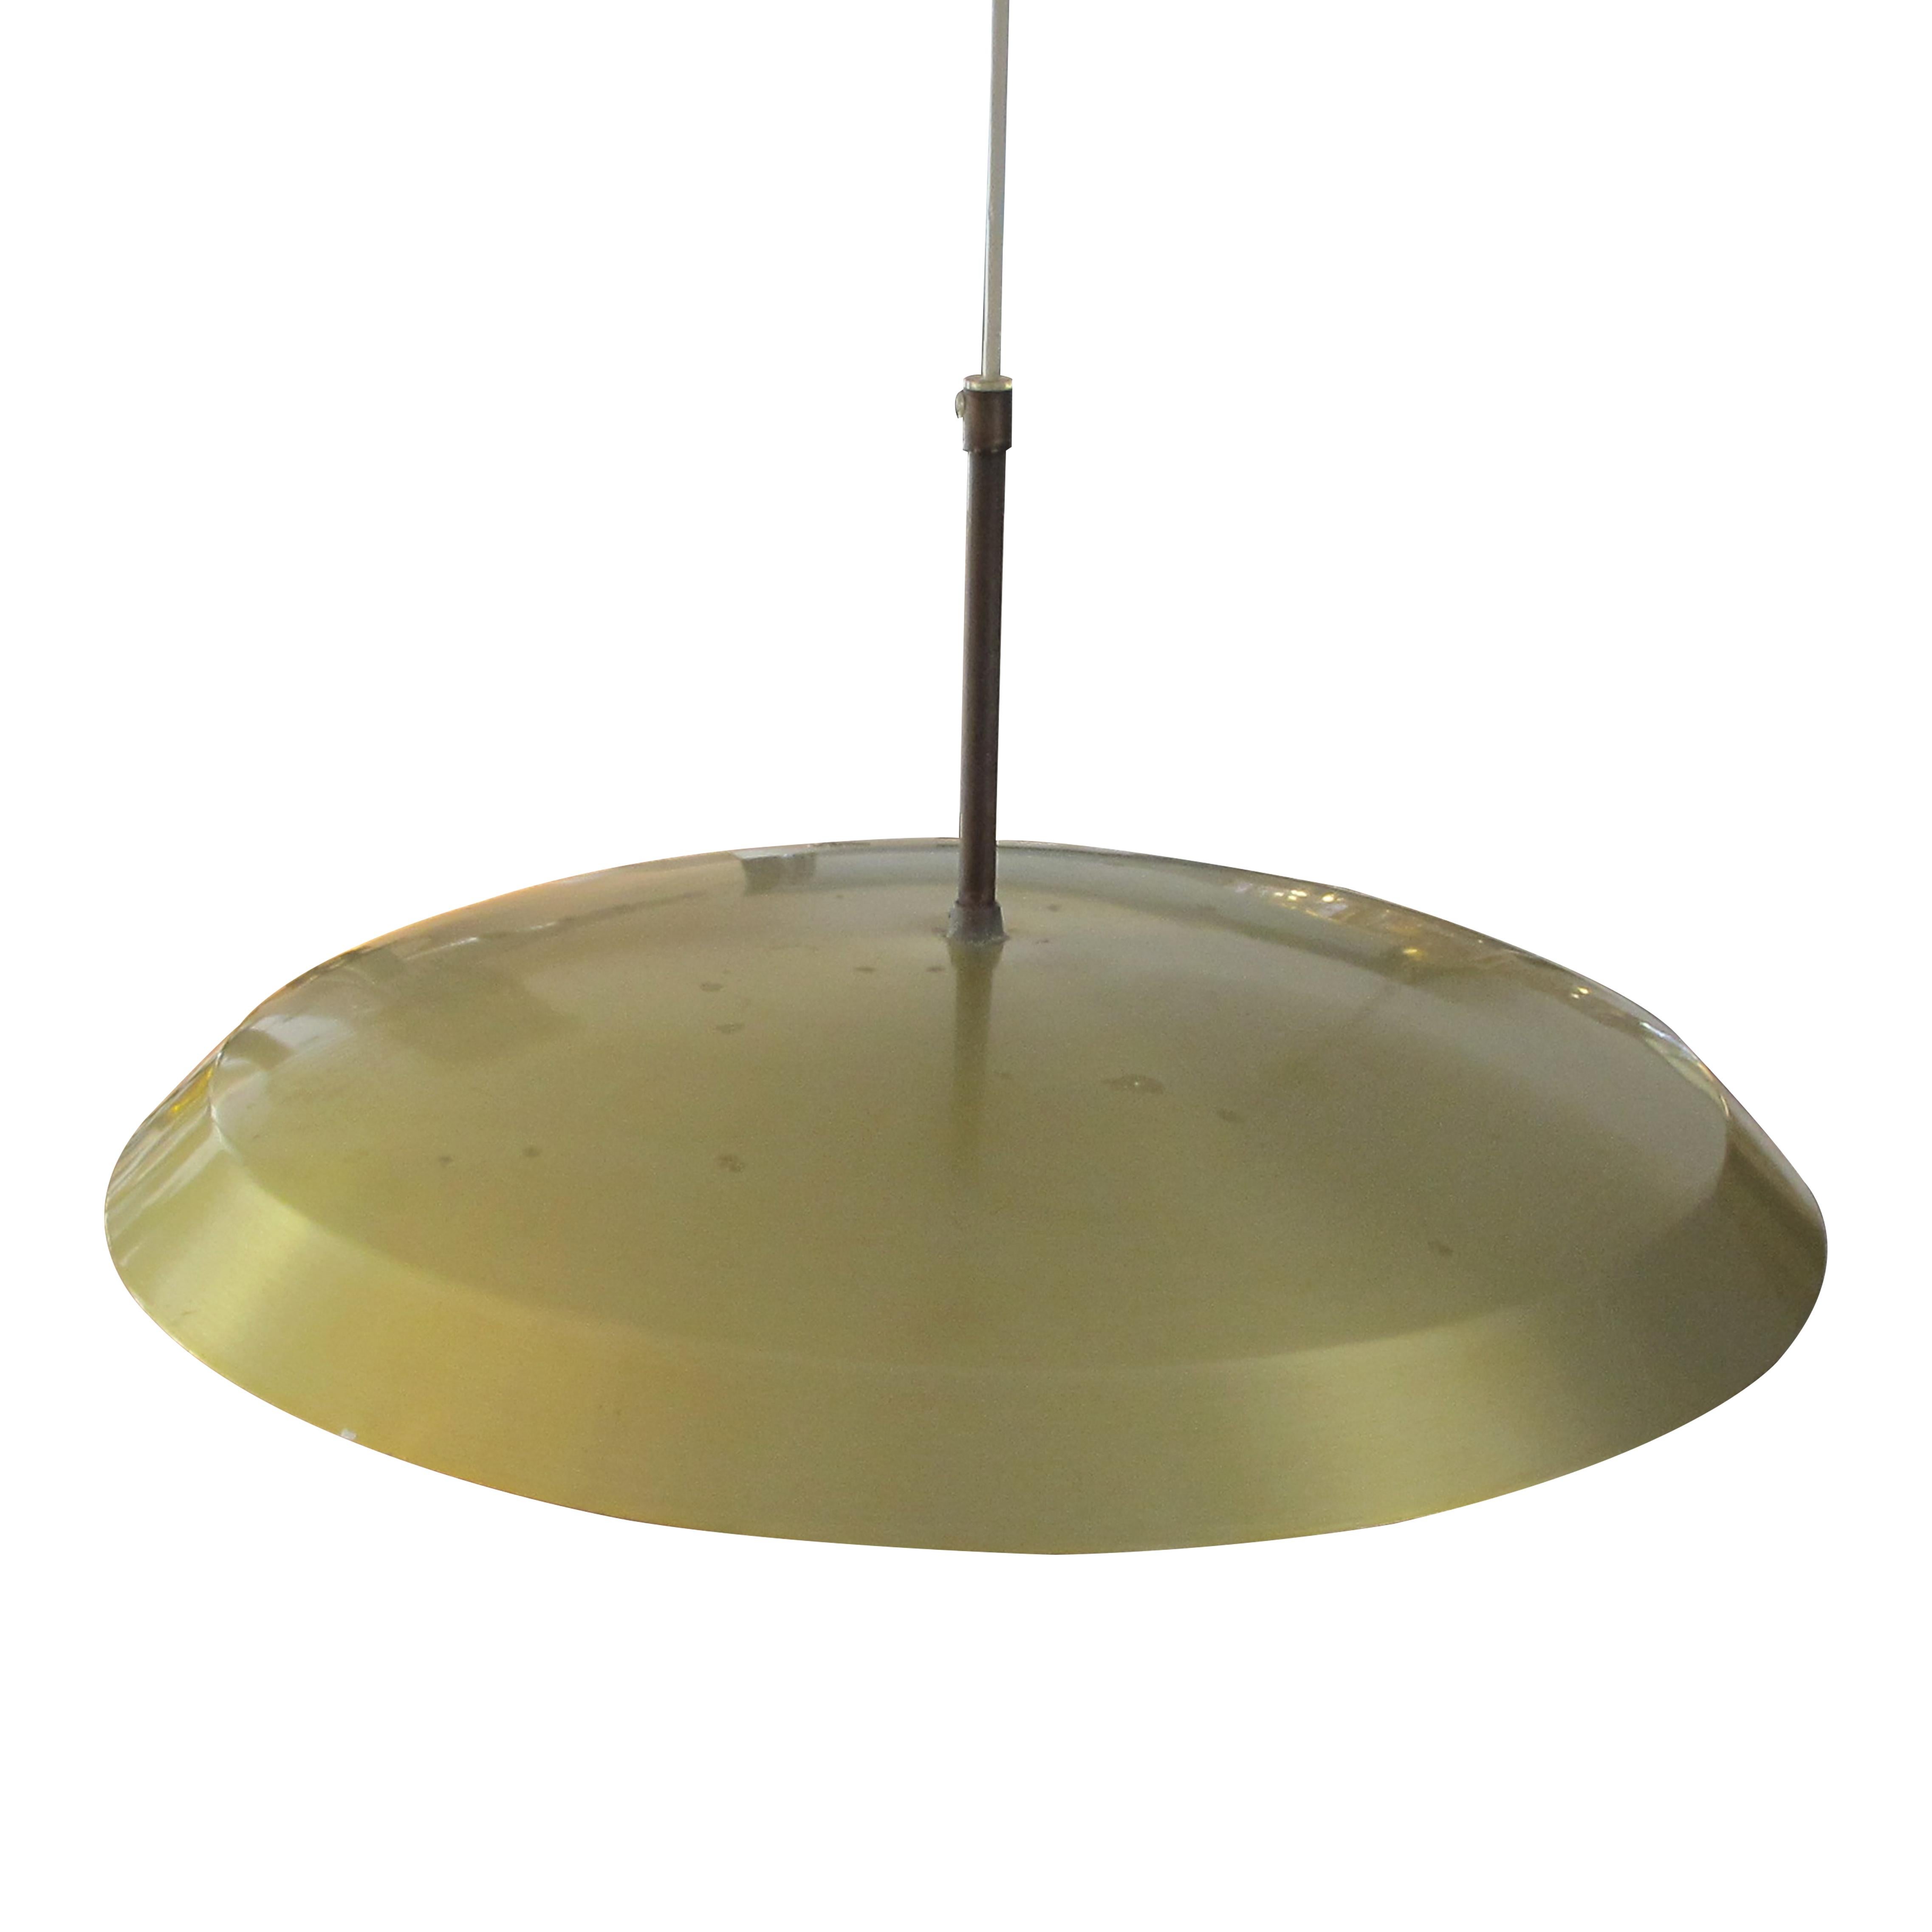 1960s brass circular ceiling light with beautifully detailed moulded glass shade which sits underneath. This is a simple yet elegant timeless design, very well made and in great condition. The ceiling lamp is wired to the European standard. 

6